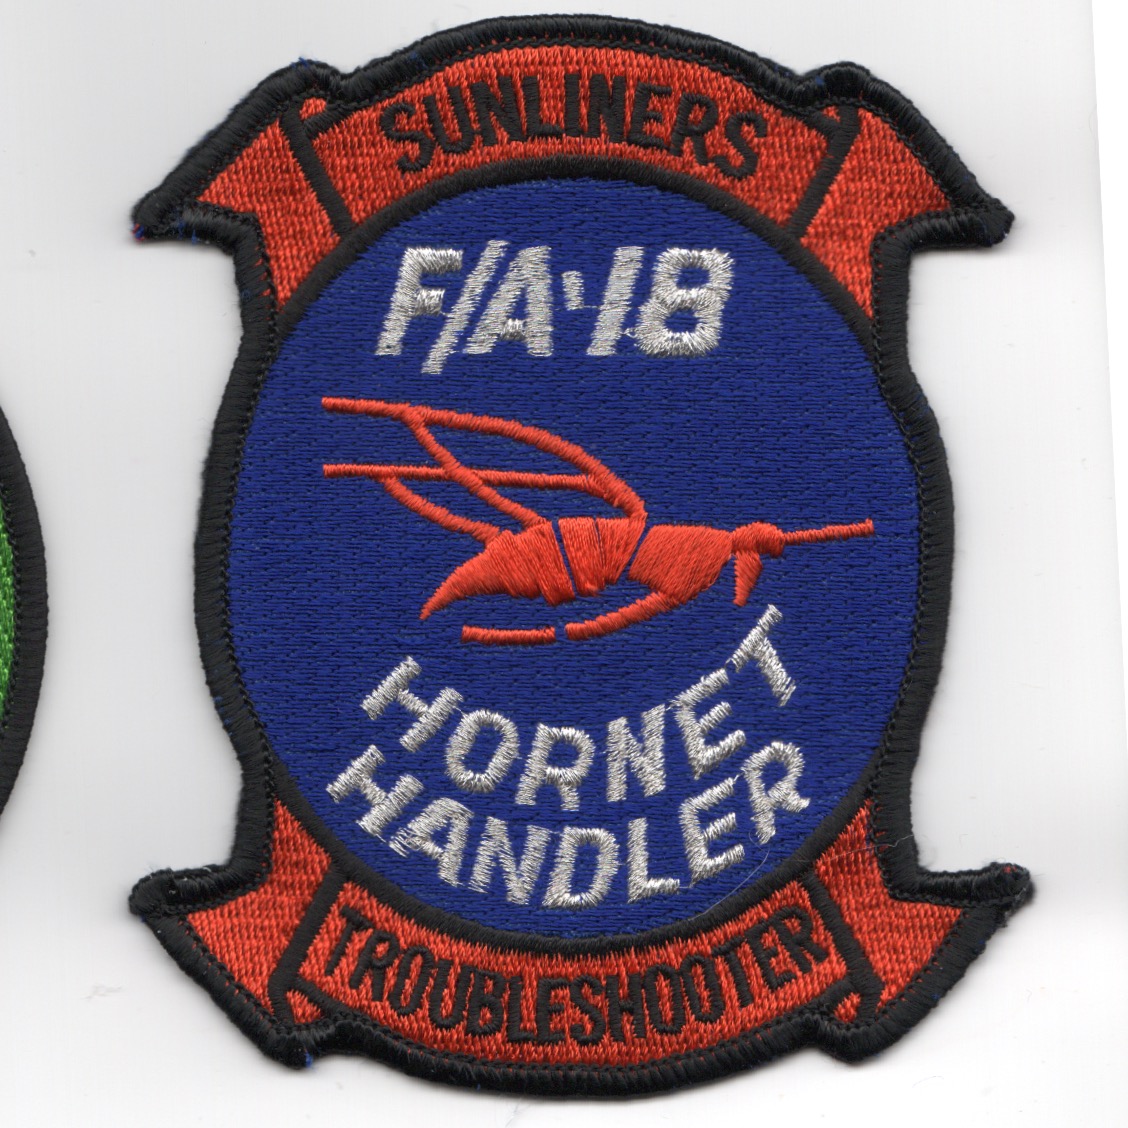 VFA-81 'HH-TROUBLESHOOTER' Patch